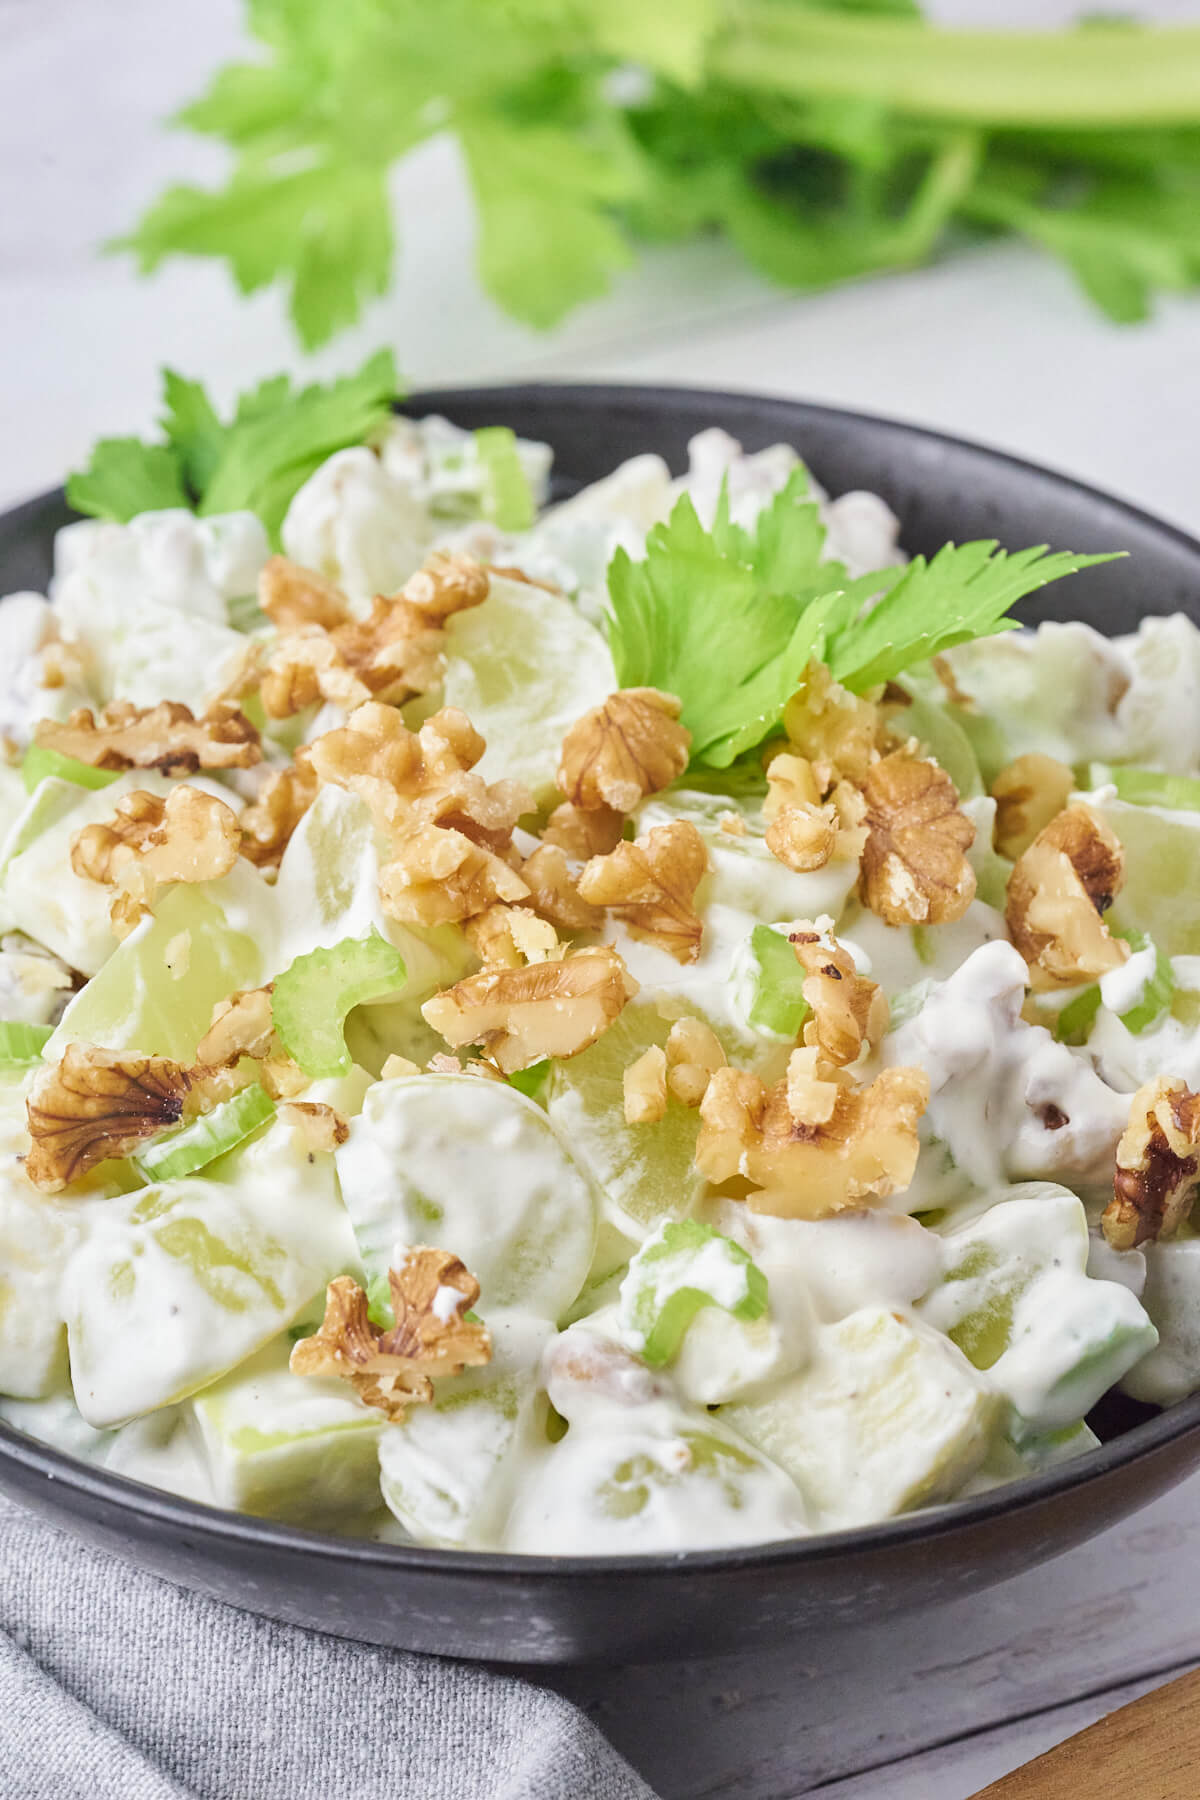 Serving of classic Waldorf salad garnished with celery leaves and chopped walnut kernels.